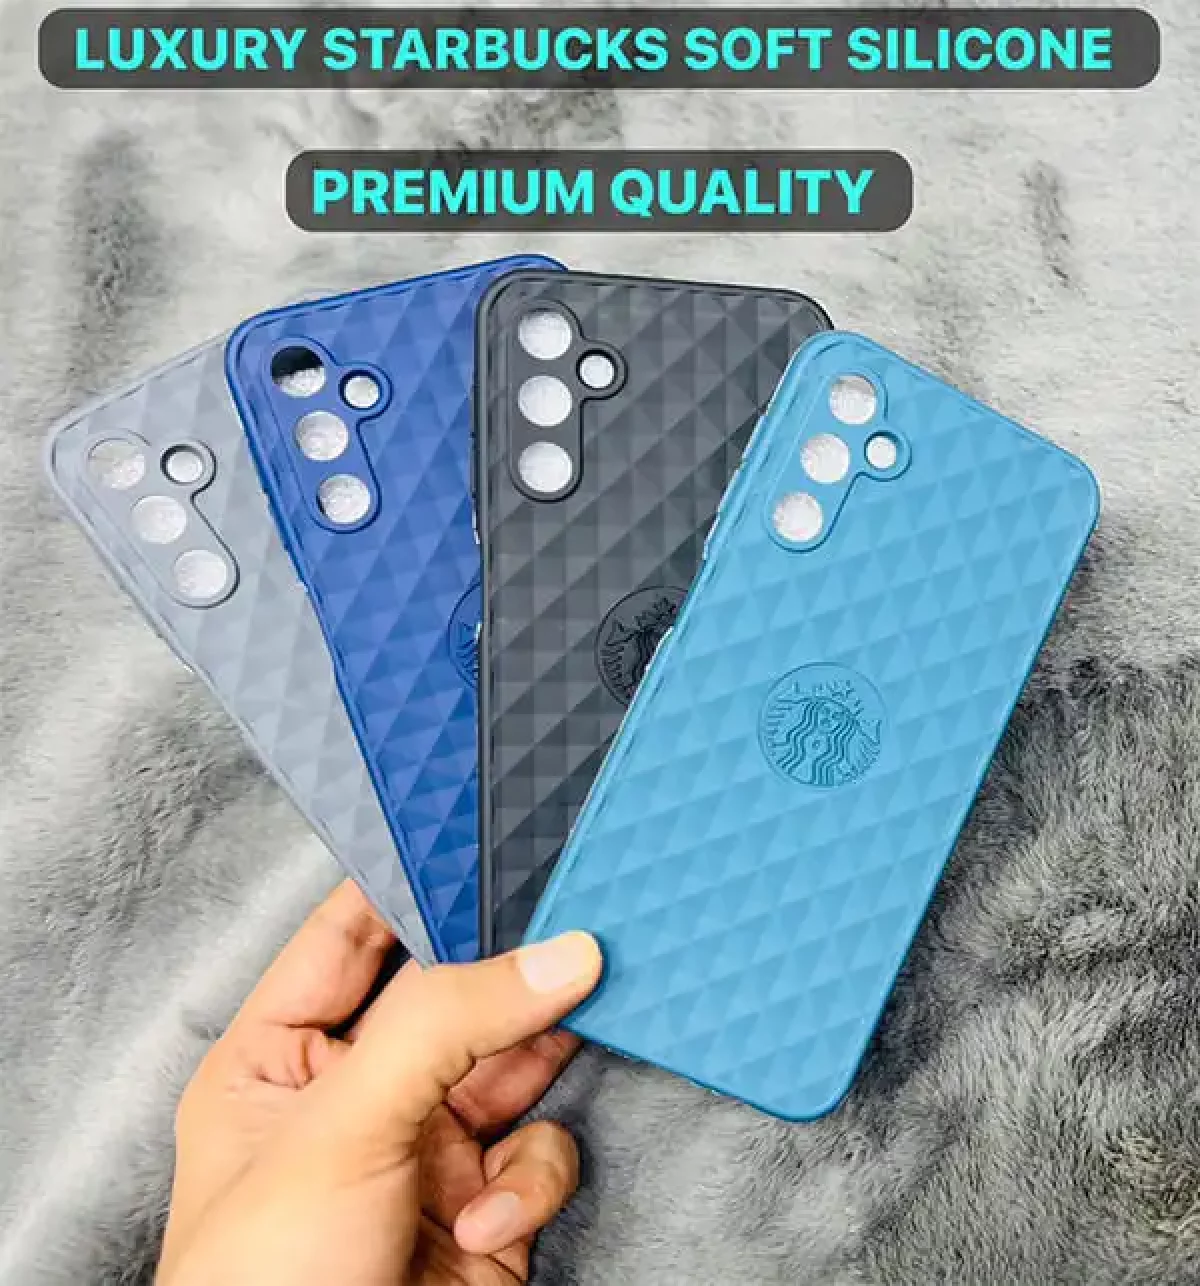 https://celltophone.com/wp-content/uploads/2023/12/Starbucks-Soft-Silicone-Mobile-Cover-1200x1286.webp